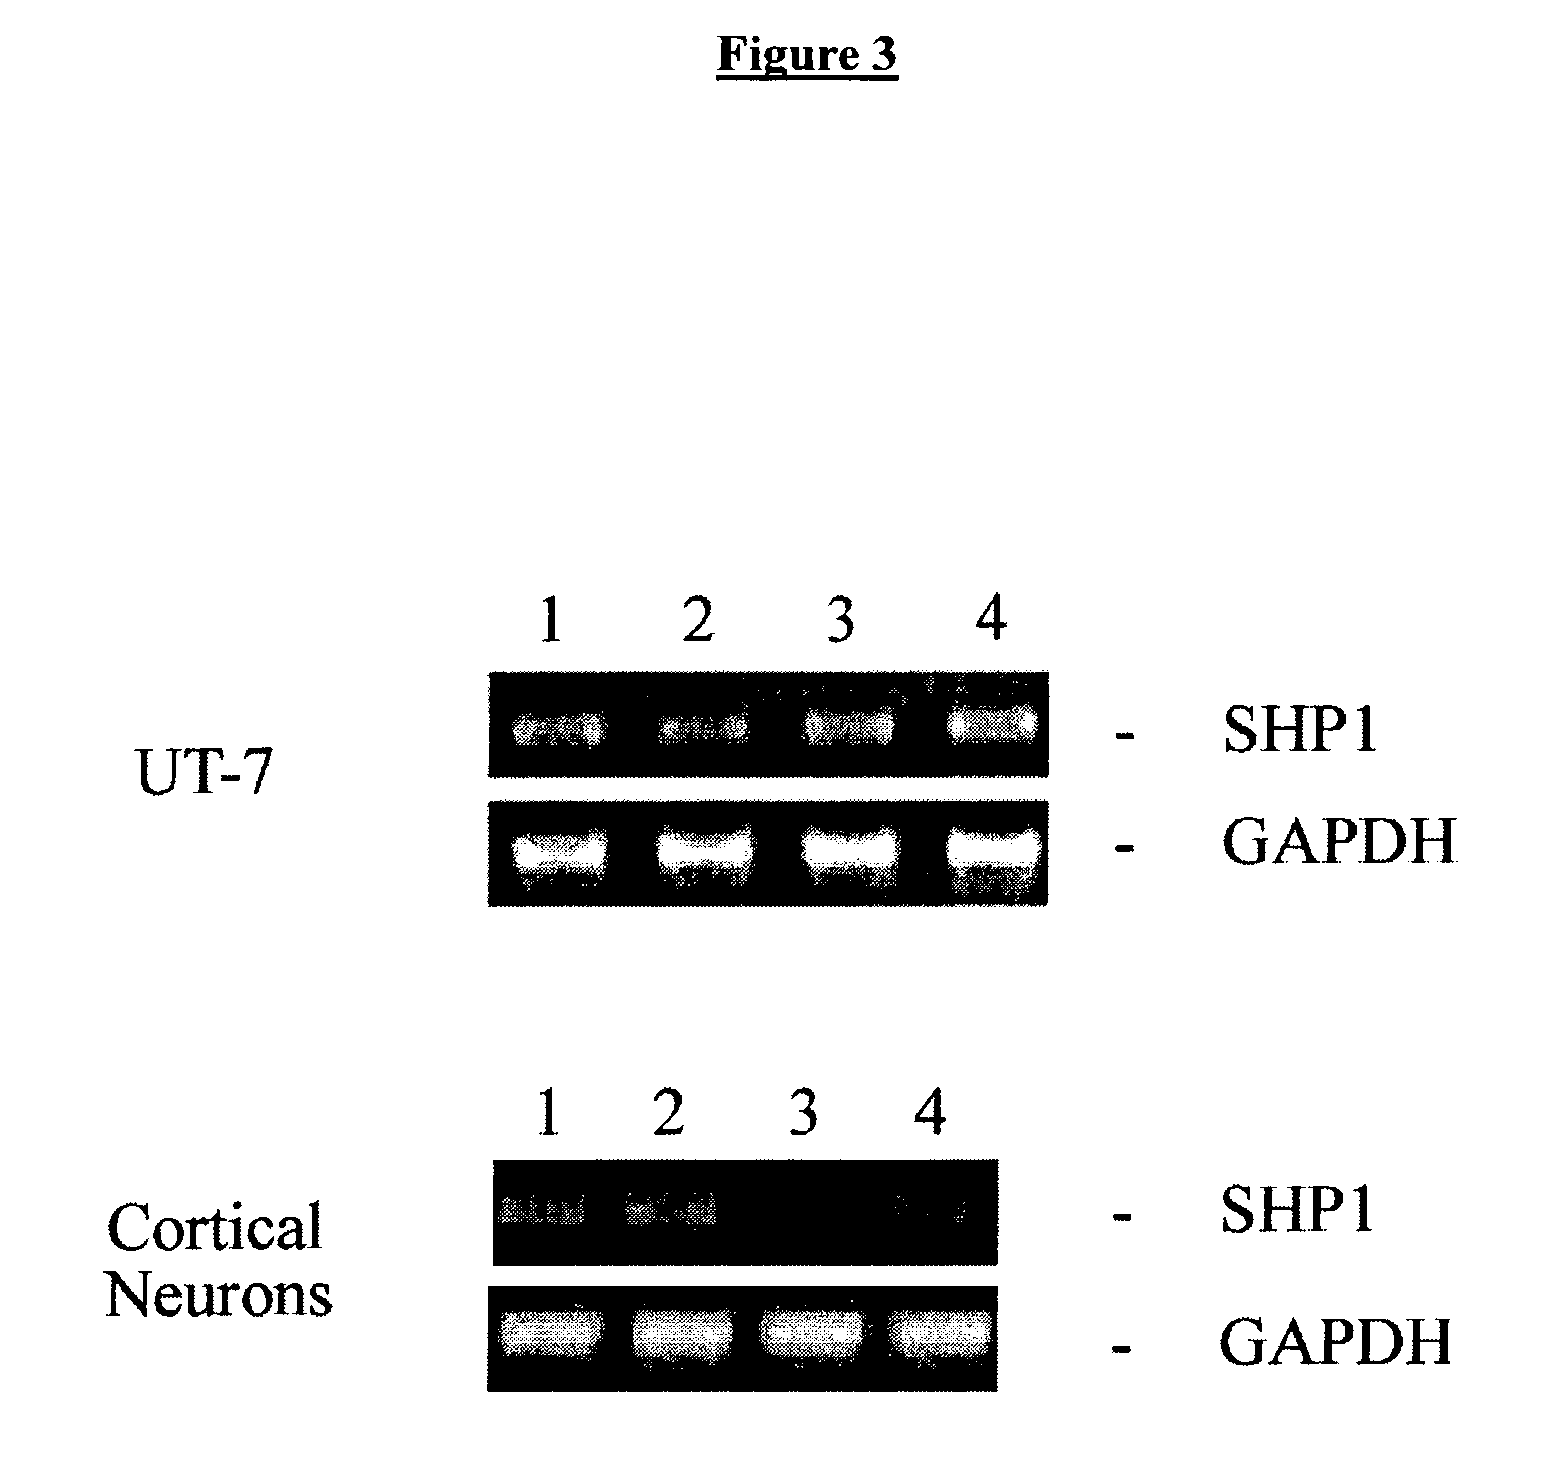 Methods for SHP1 mediated neuroprotection